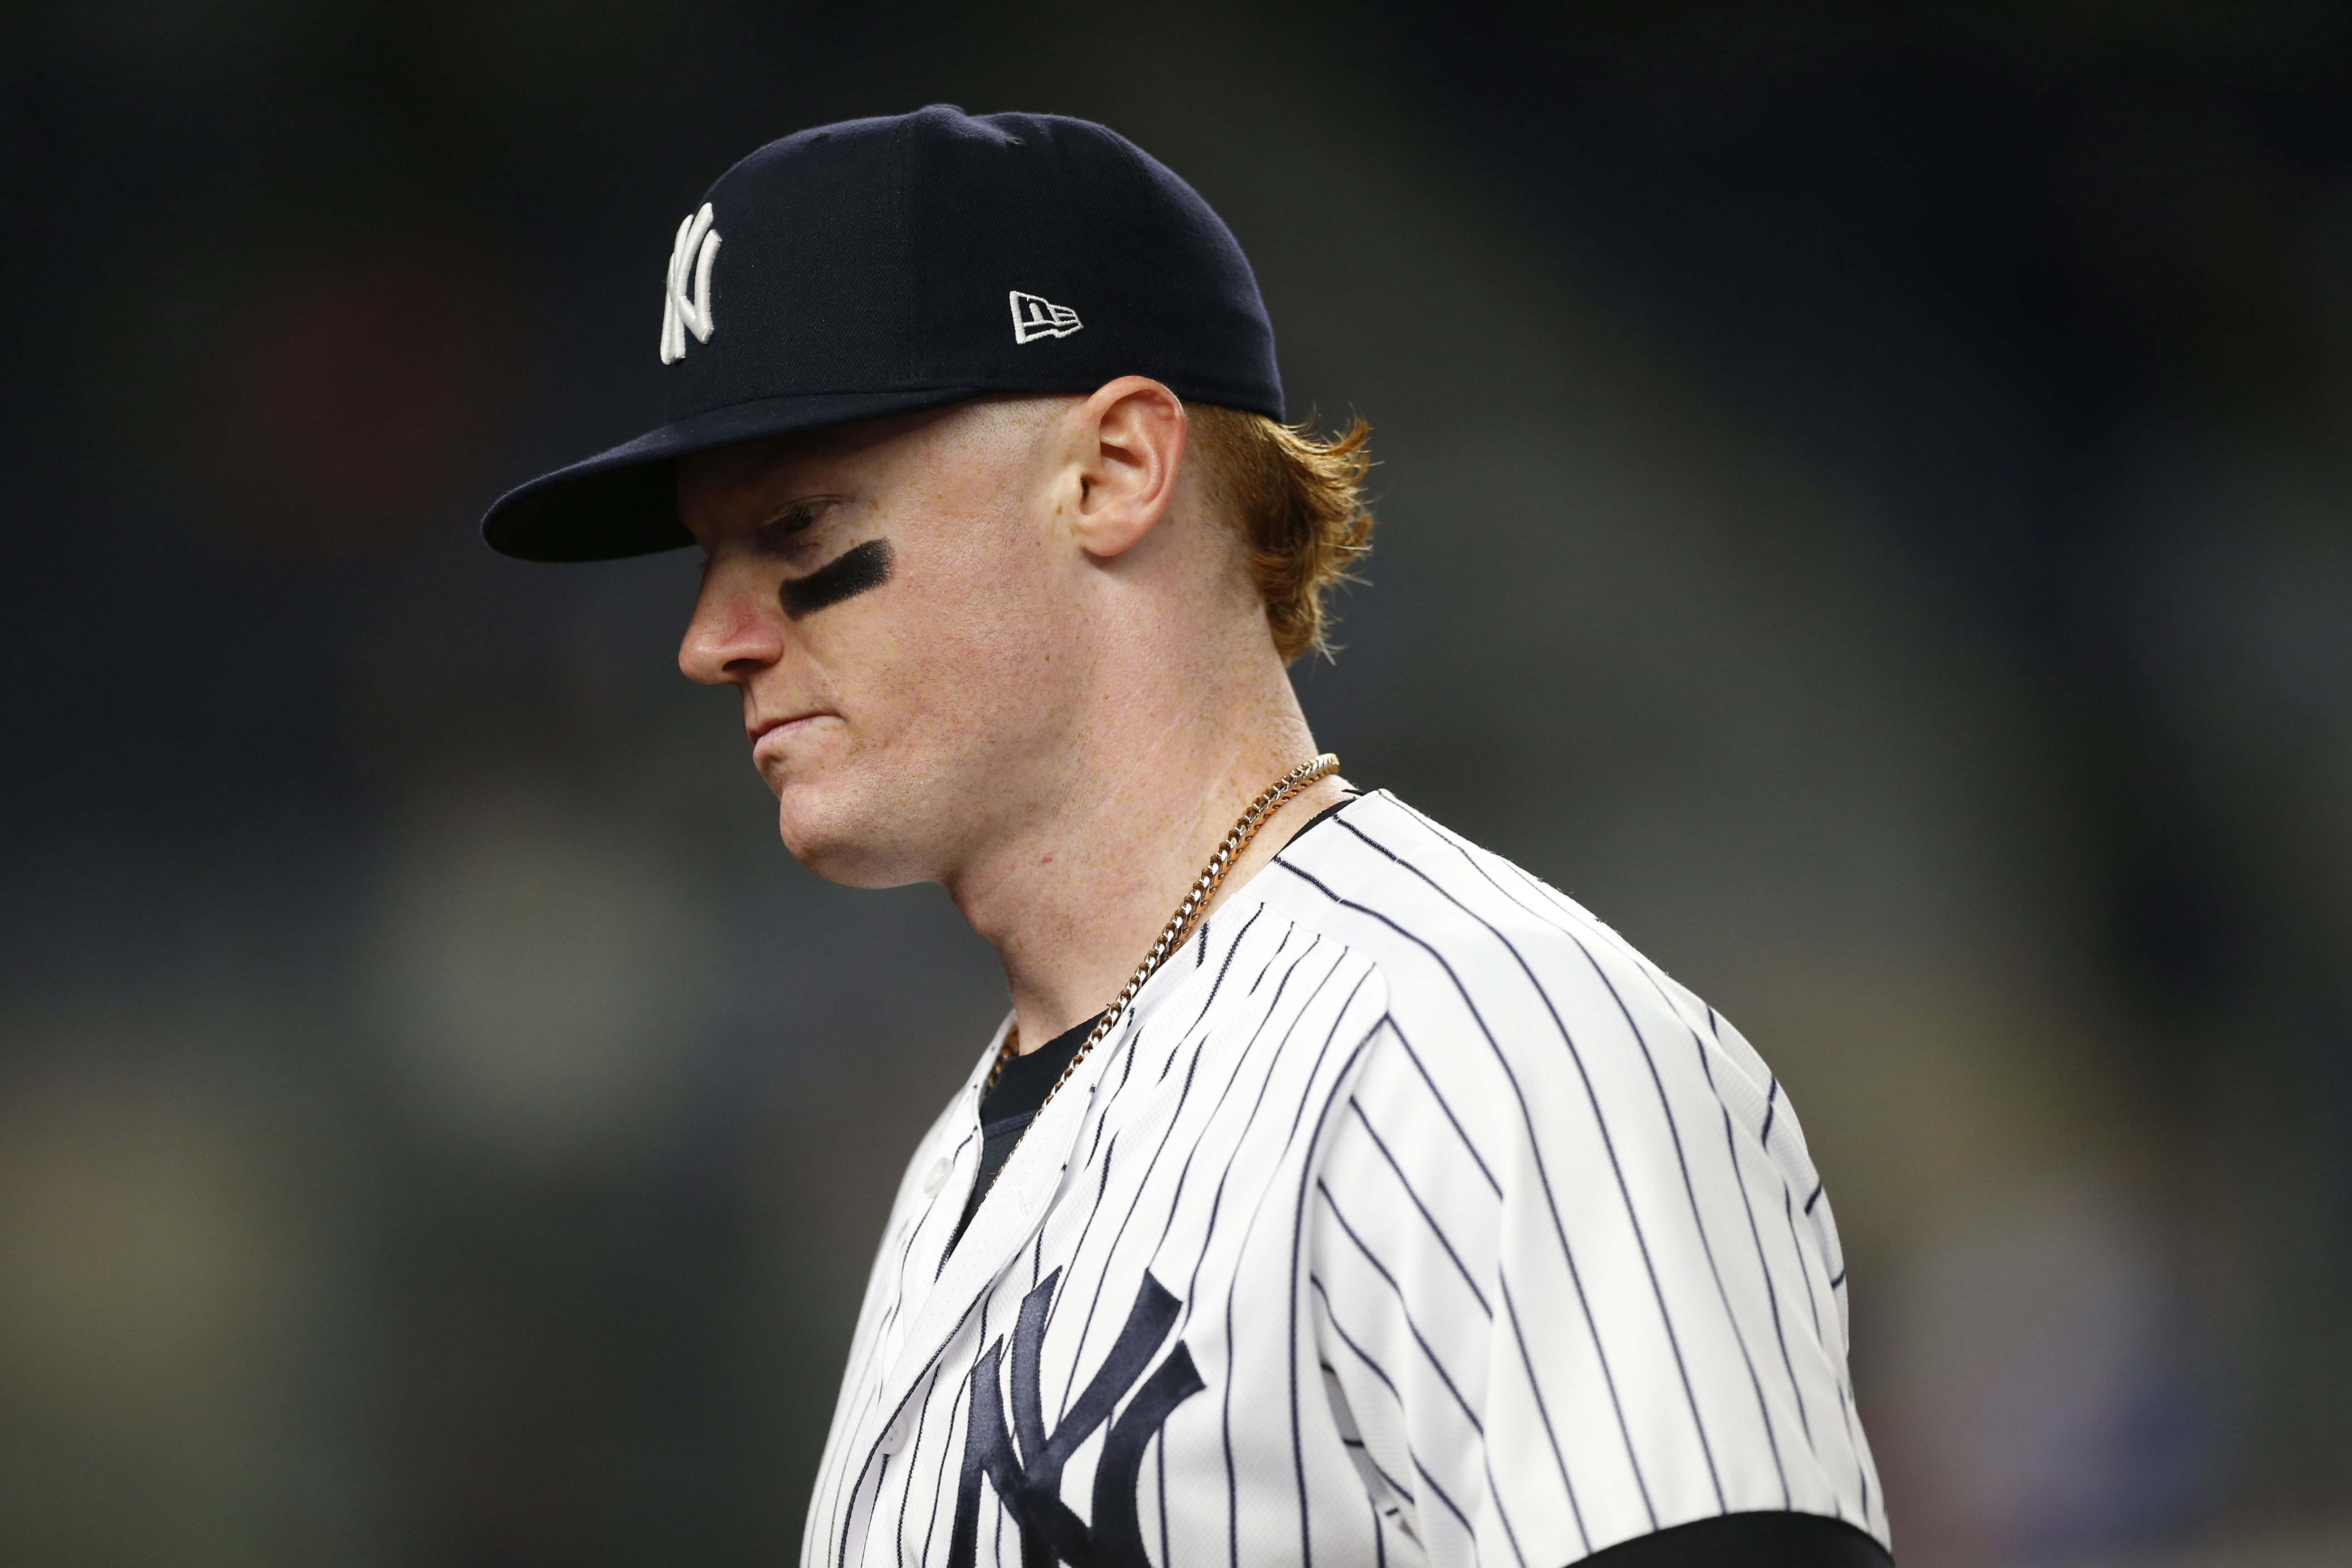 MLB: Yankees' Clint Frazier mistakenly honest in spat with media